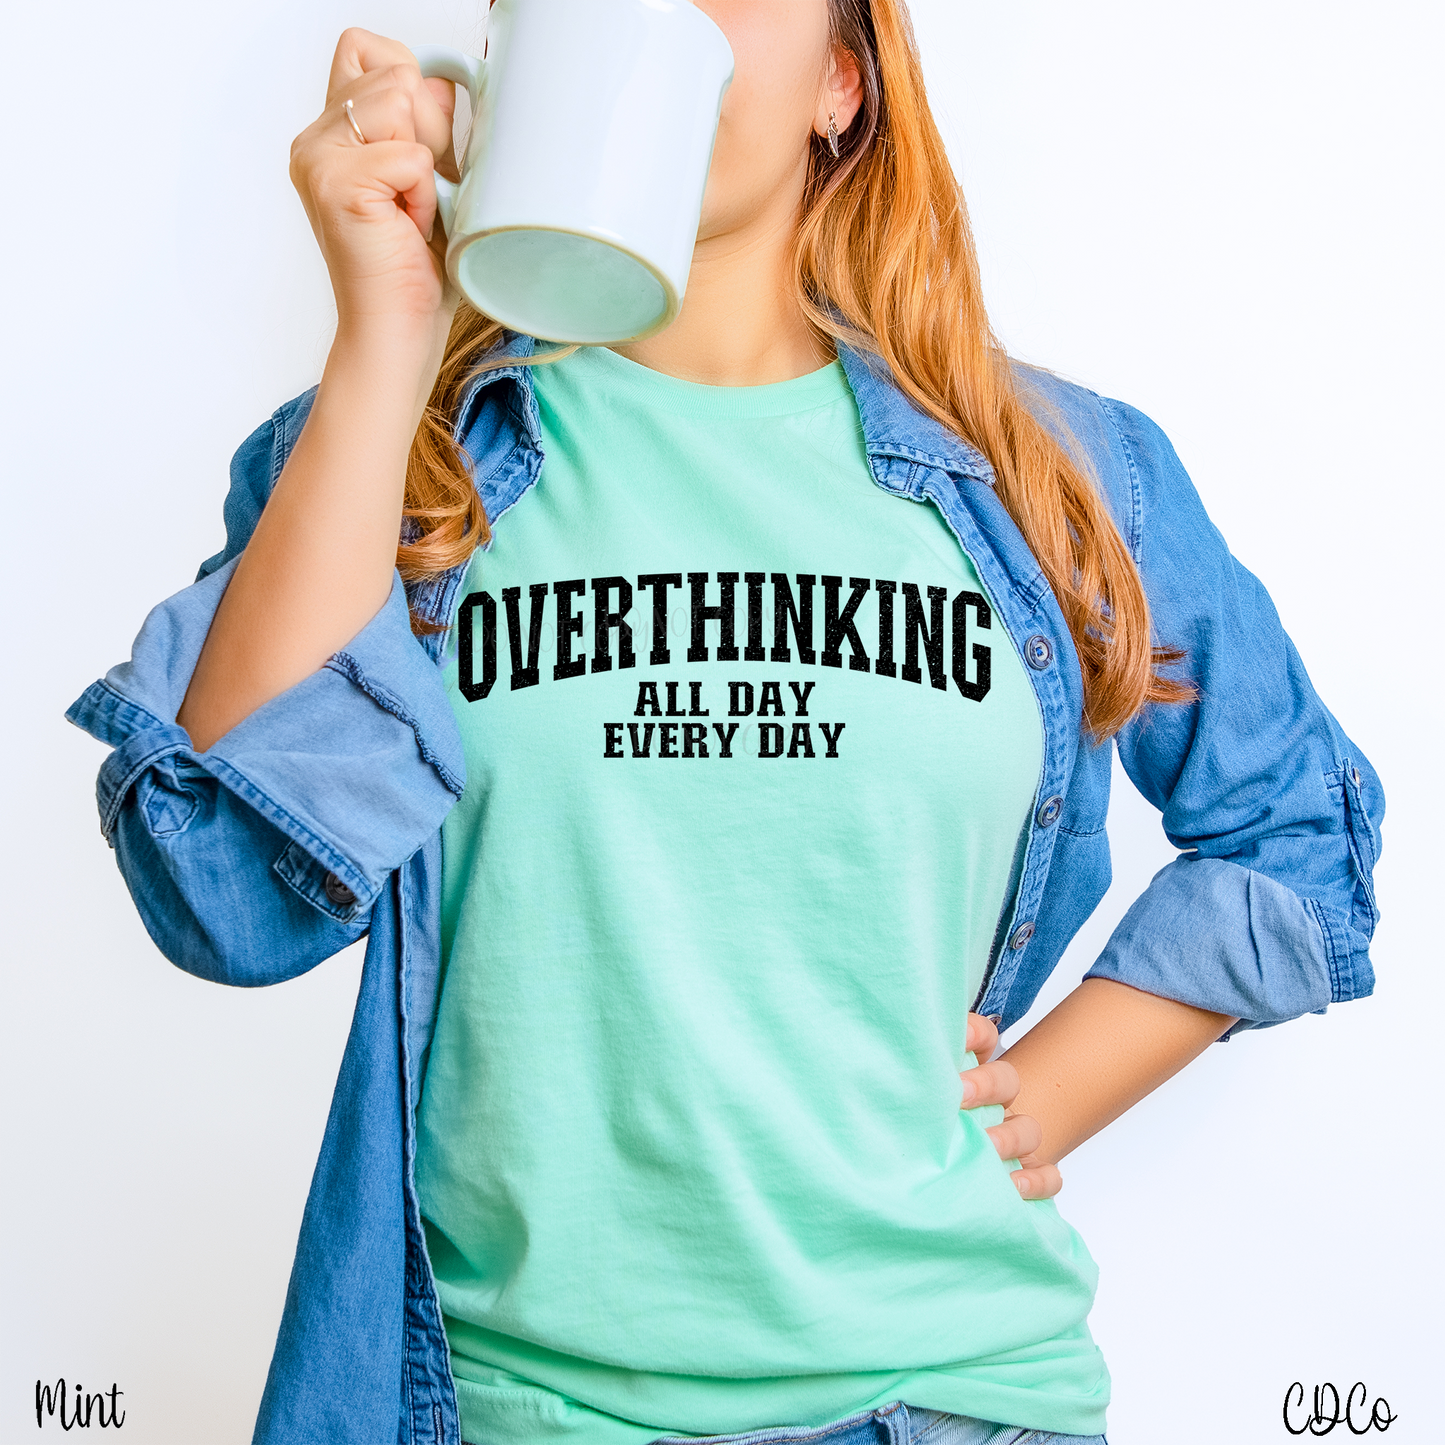 Overthinking All Day Every Day (325°)